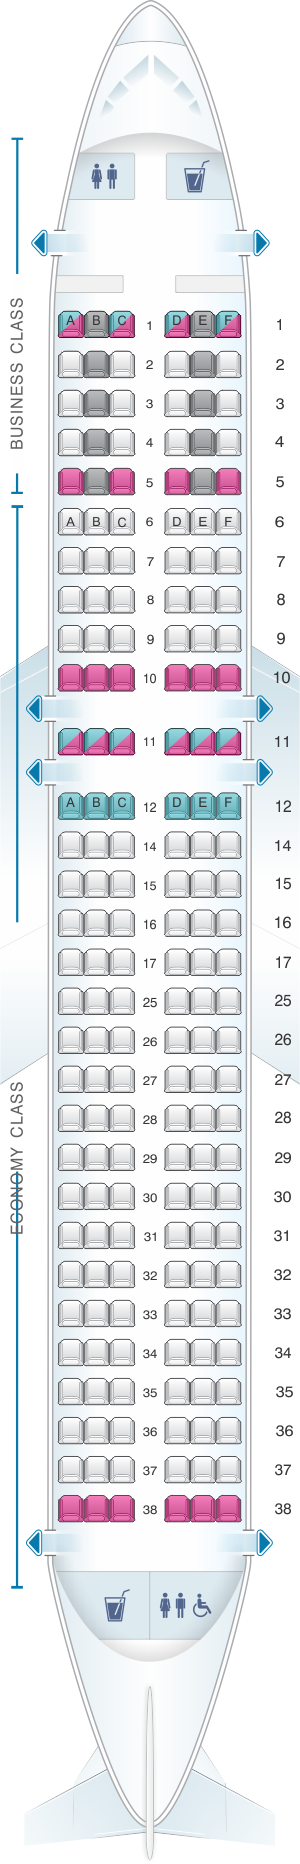 Seat Map SWISS Airbus A320 200 | SeatMaestro